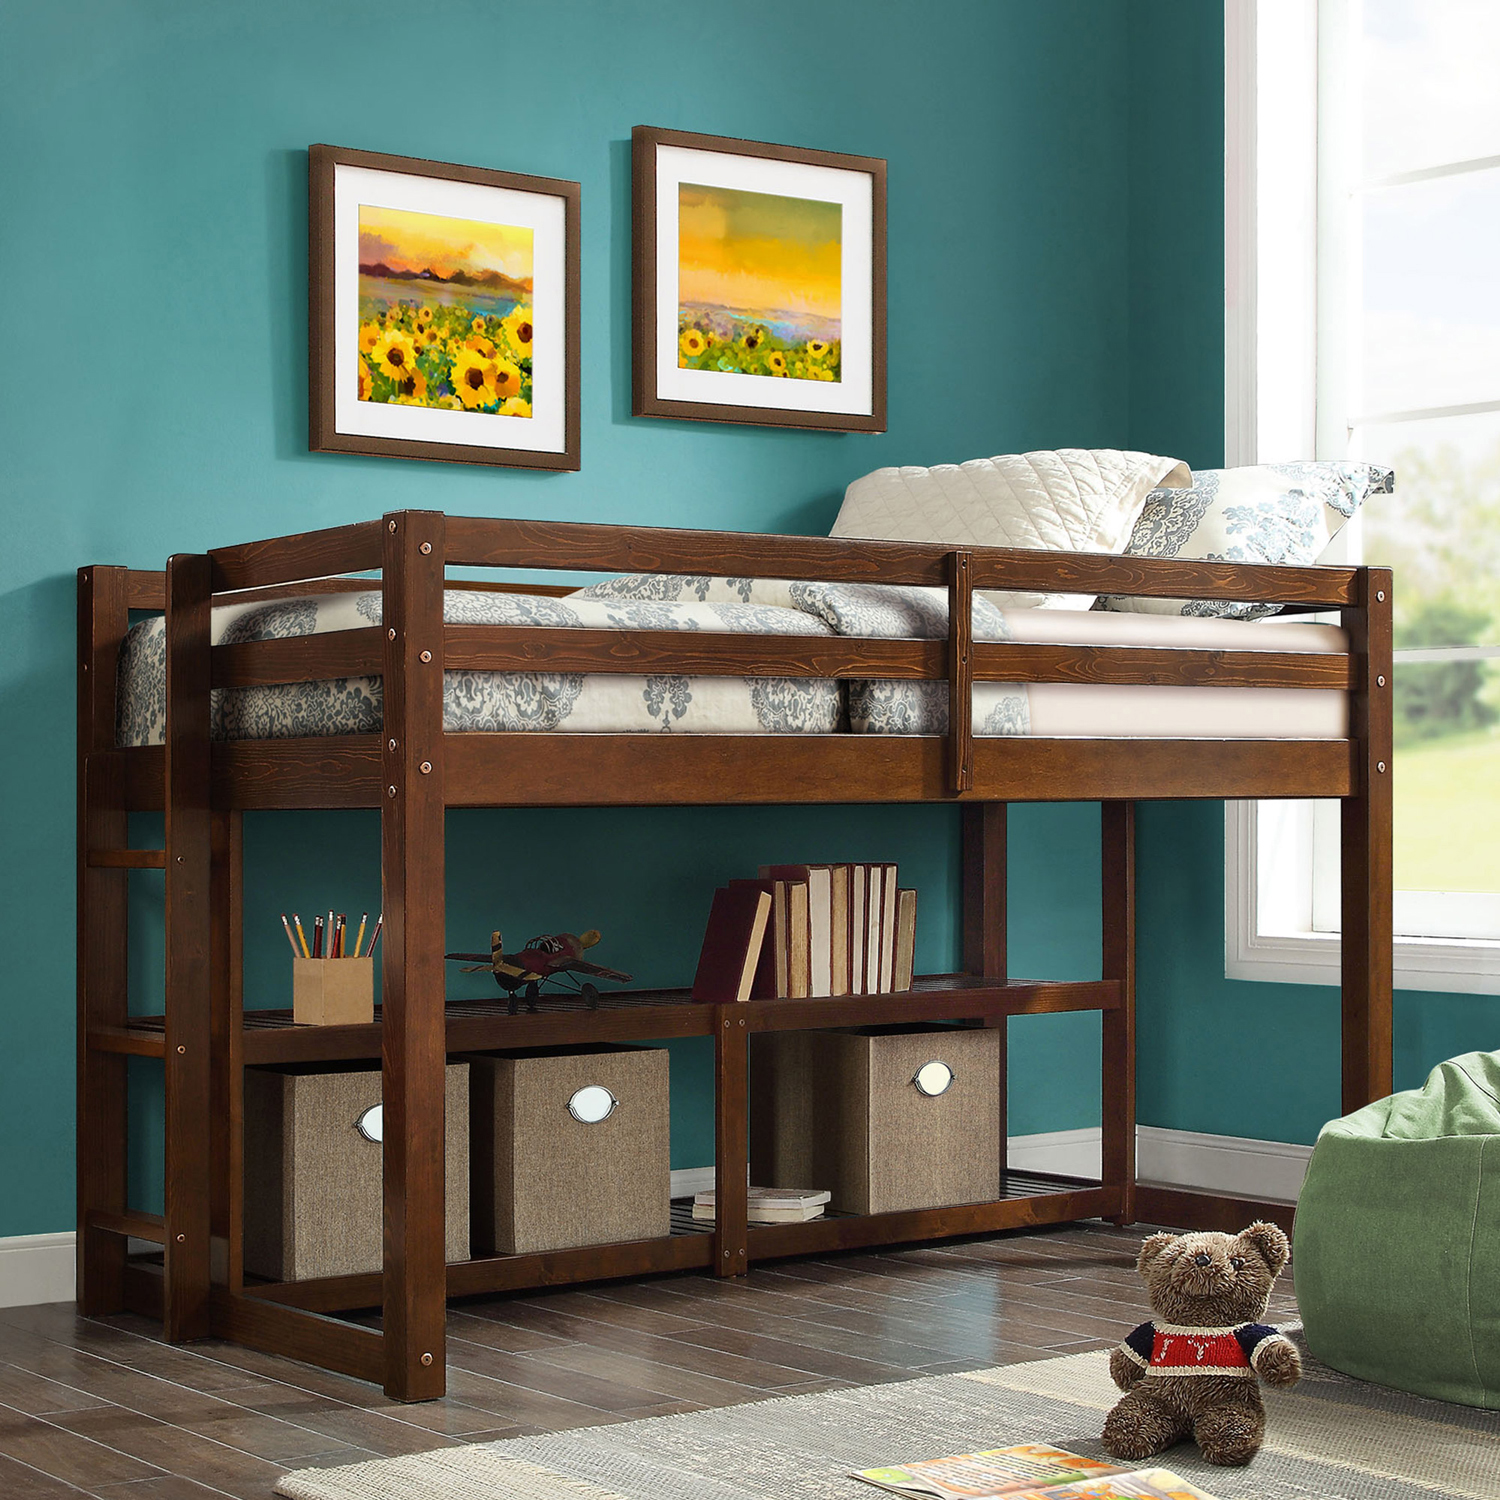 Better Homes and Gardens Greer Twin Loft Storage Bed, Espresso - image 1 of 4